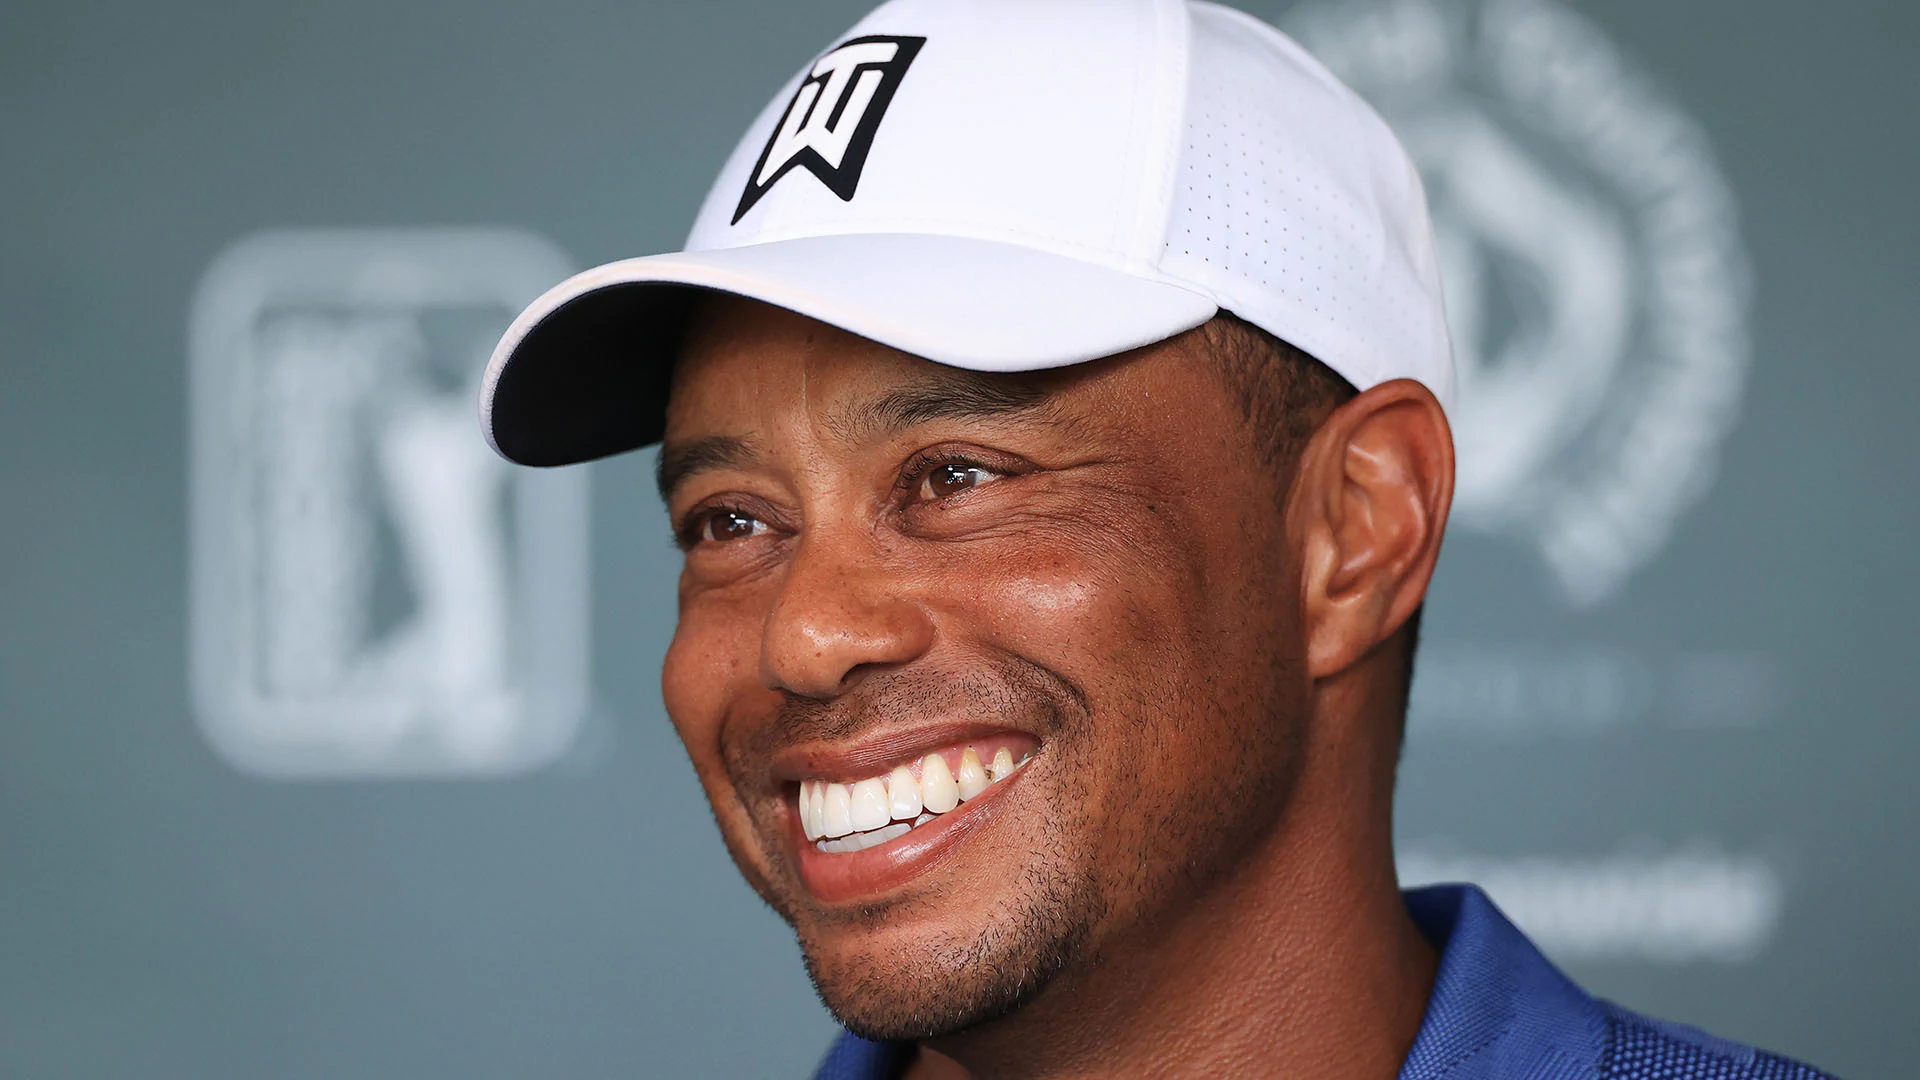 What’s Tiger Woods’ go-to order at Starbucks?